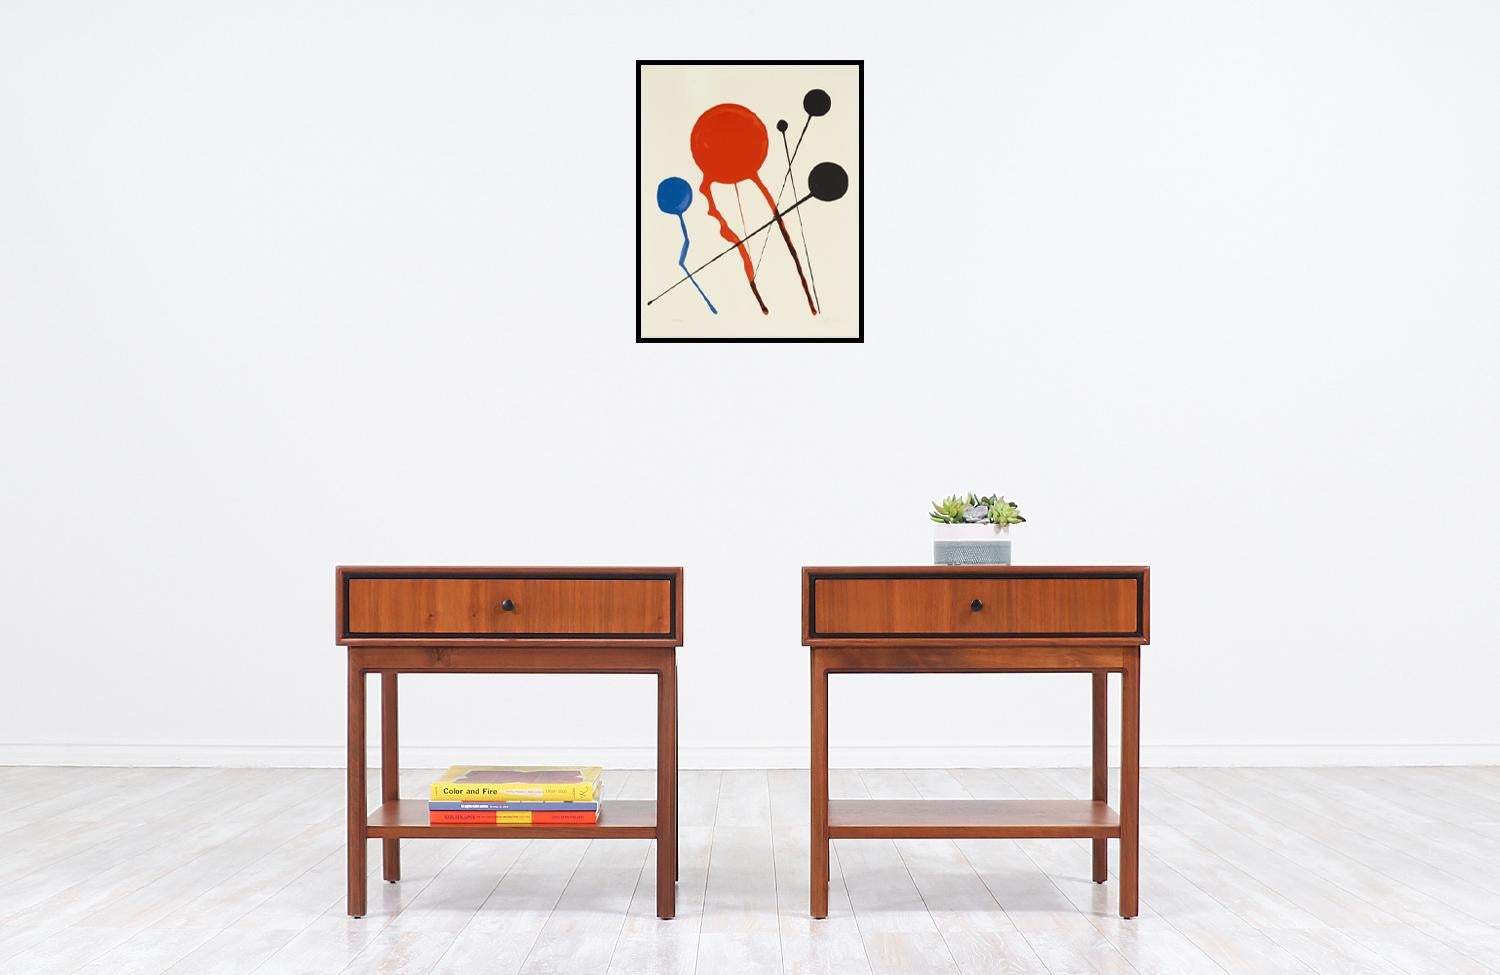 Spectacular pair of vintage nightstands designed by American architect and designer Milo Baughman in collaboration with Arch Gordon in the 1960s. Our nightstands are crafted in warm walnut wood that features single dovetailed drawers with Baughman's